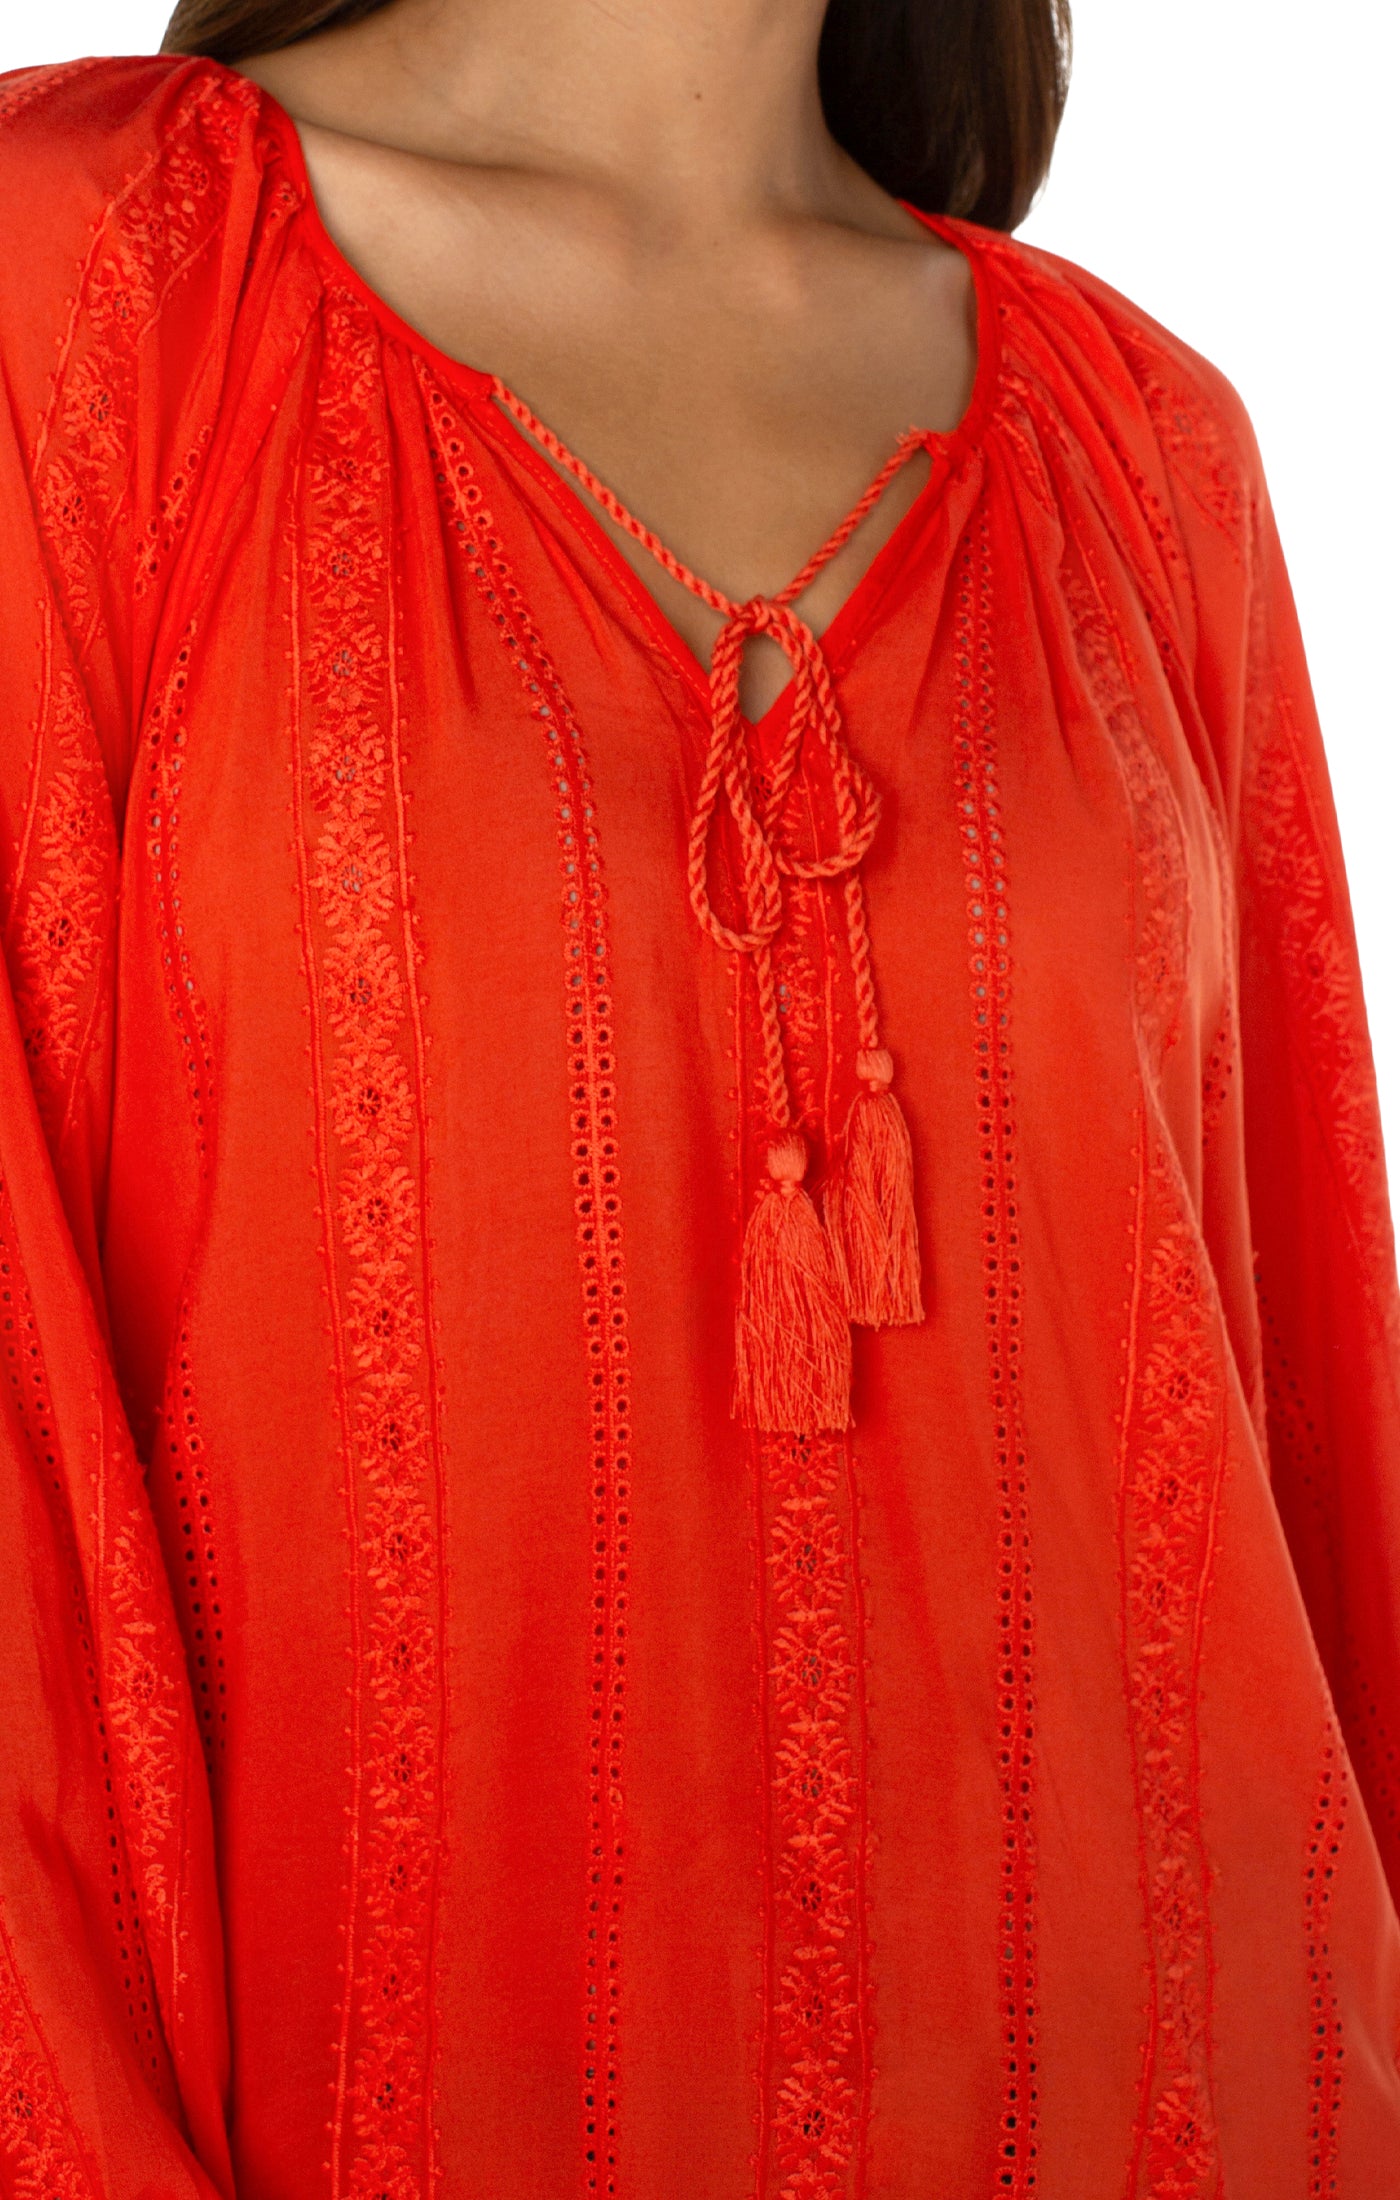 Liverpool Embroidered Shirred Blouse - Coral Blaze Close Up View